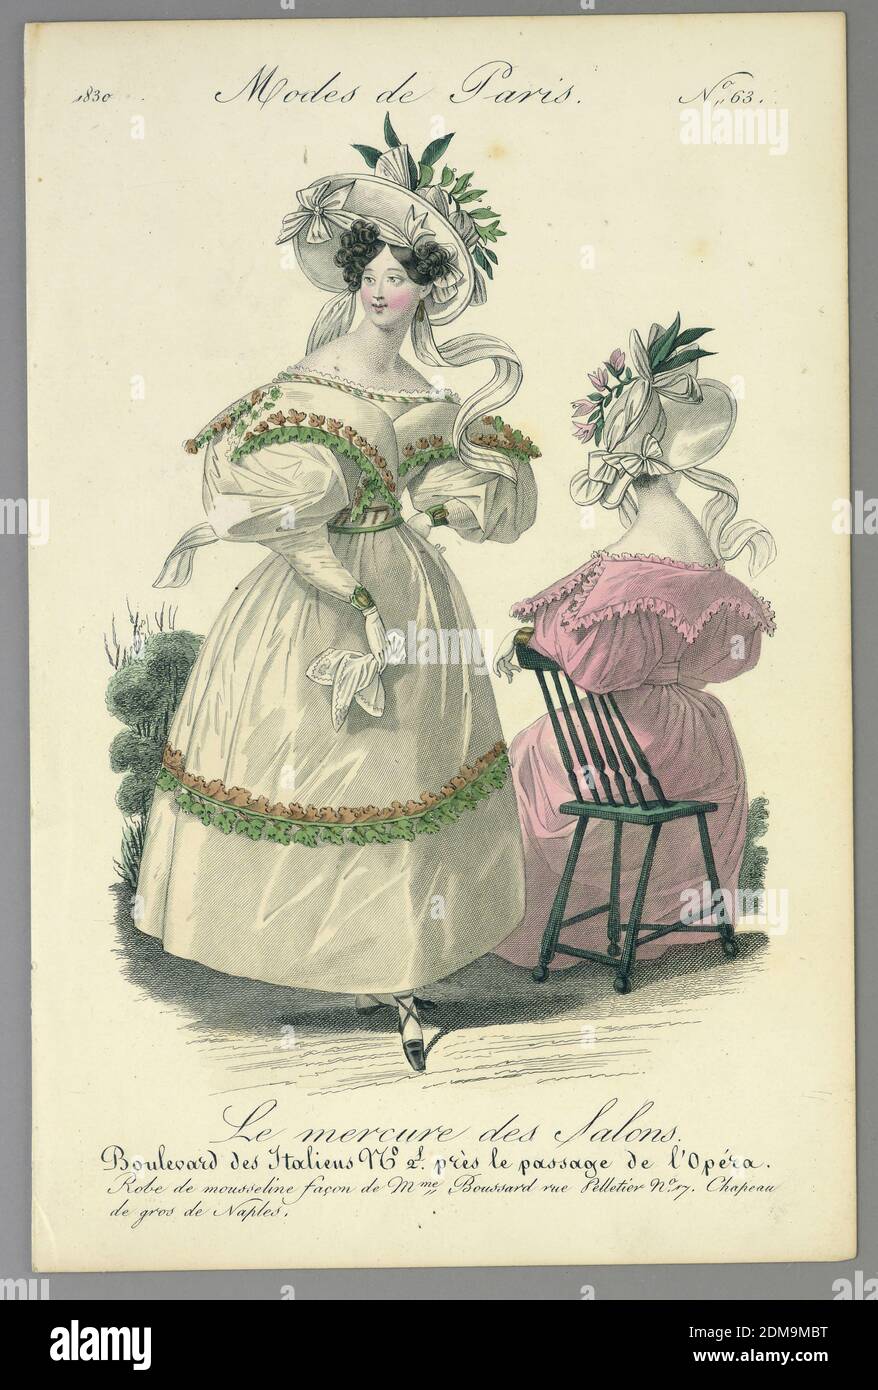 Fashion Plate from Le Mercure des Salons, Modes de Paris, Wood engraving, brush and watercolor on paper, One woman standing left, wearing a white dress and hat, with green and brown trim; the other sitting right, in a pink dress. Title above and below., Paris, France, 1830, Print Stock Photo